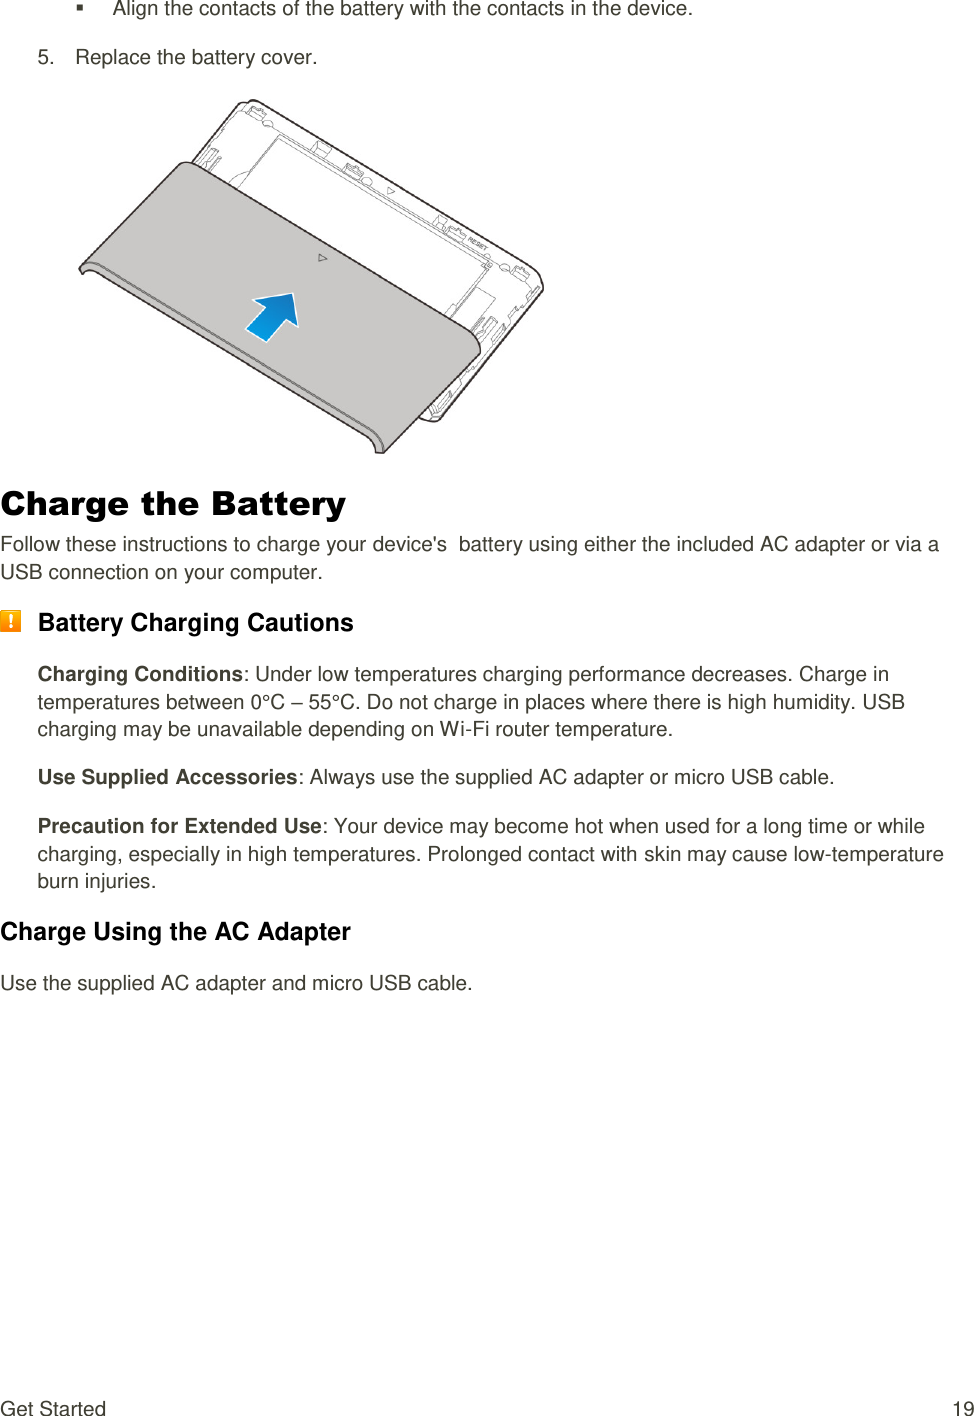 Get Started  19   Align the contacts of the battery with the contacts in the device. 5.  Replace the battery cover.    Charge the Battery Follow these instructions to charge your device&apos;s  battery using either the included AC adapter or via a USB connection on your computer.  Battery Charging Cautions Charging Conditions: Under low temperatures charging performance decreases. Charge in temperatures between 0°C – 55°C. Do not charge in places where there is high humidity. USB charging may be unavailable depending on Wi-Fi router temperature. Use Supplied Accessories: Always use the supplied AC adapter or micro USB cable. Precaution for Extended Use: Your device may become hot when used for a long time or while charging, especially in high temperatures. Prolonged contact with skin may cause low-temperature burn injuries. Charge Using the AC Adapter Use the supplied AC adapter and micro USB cable. 